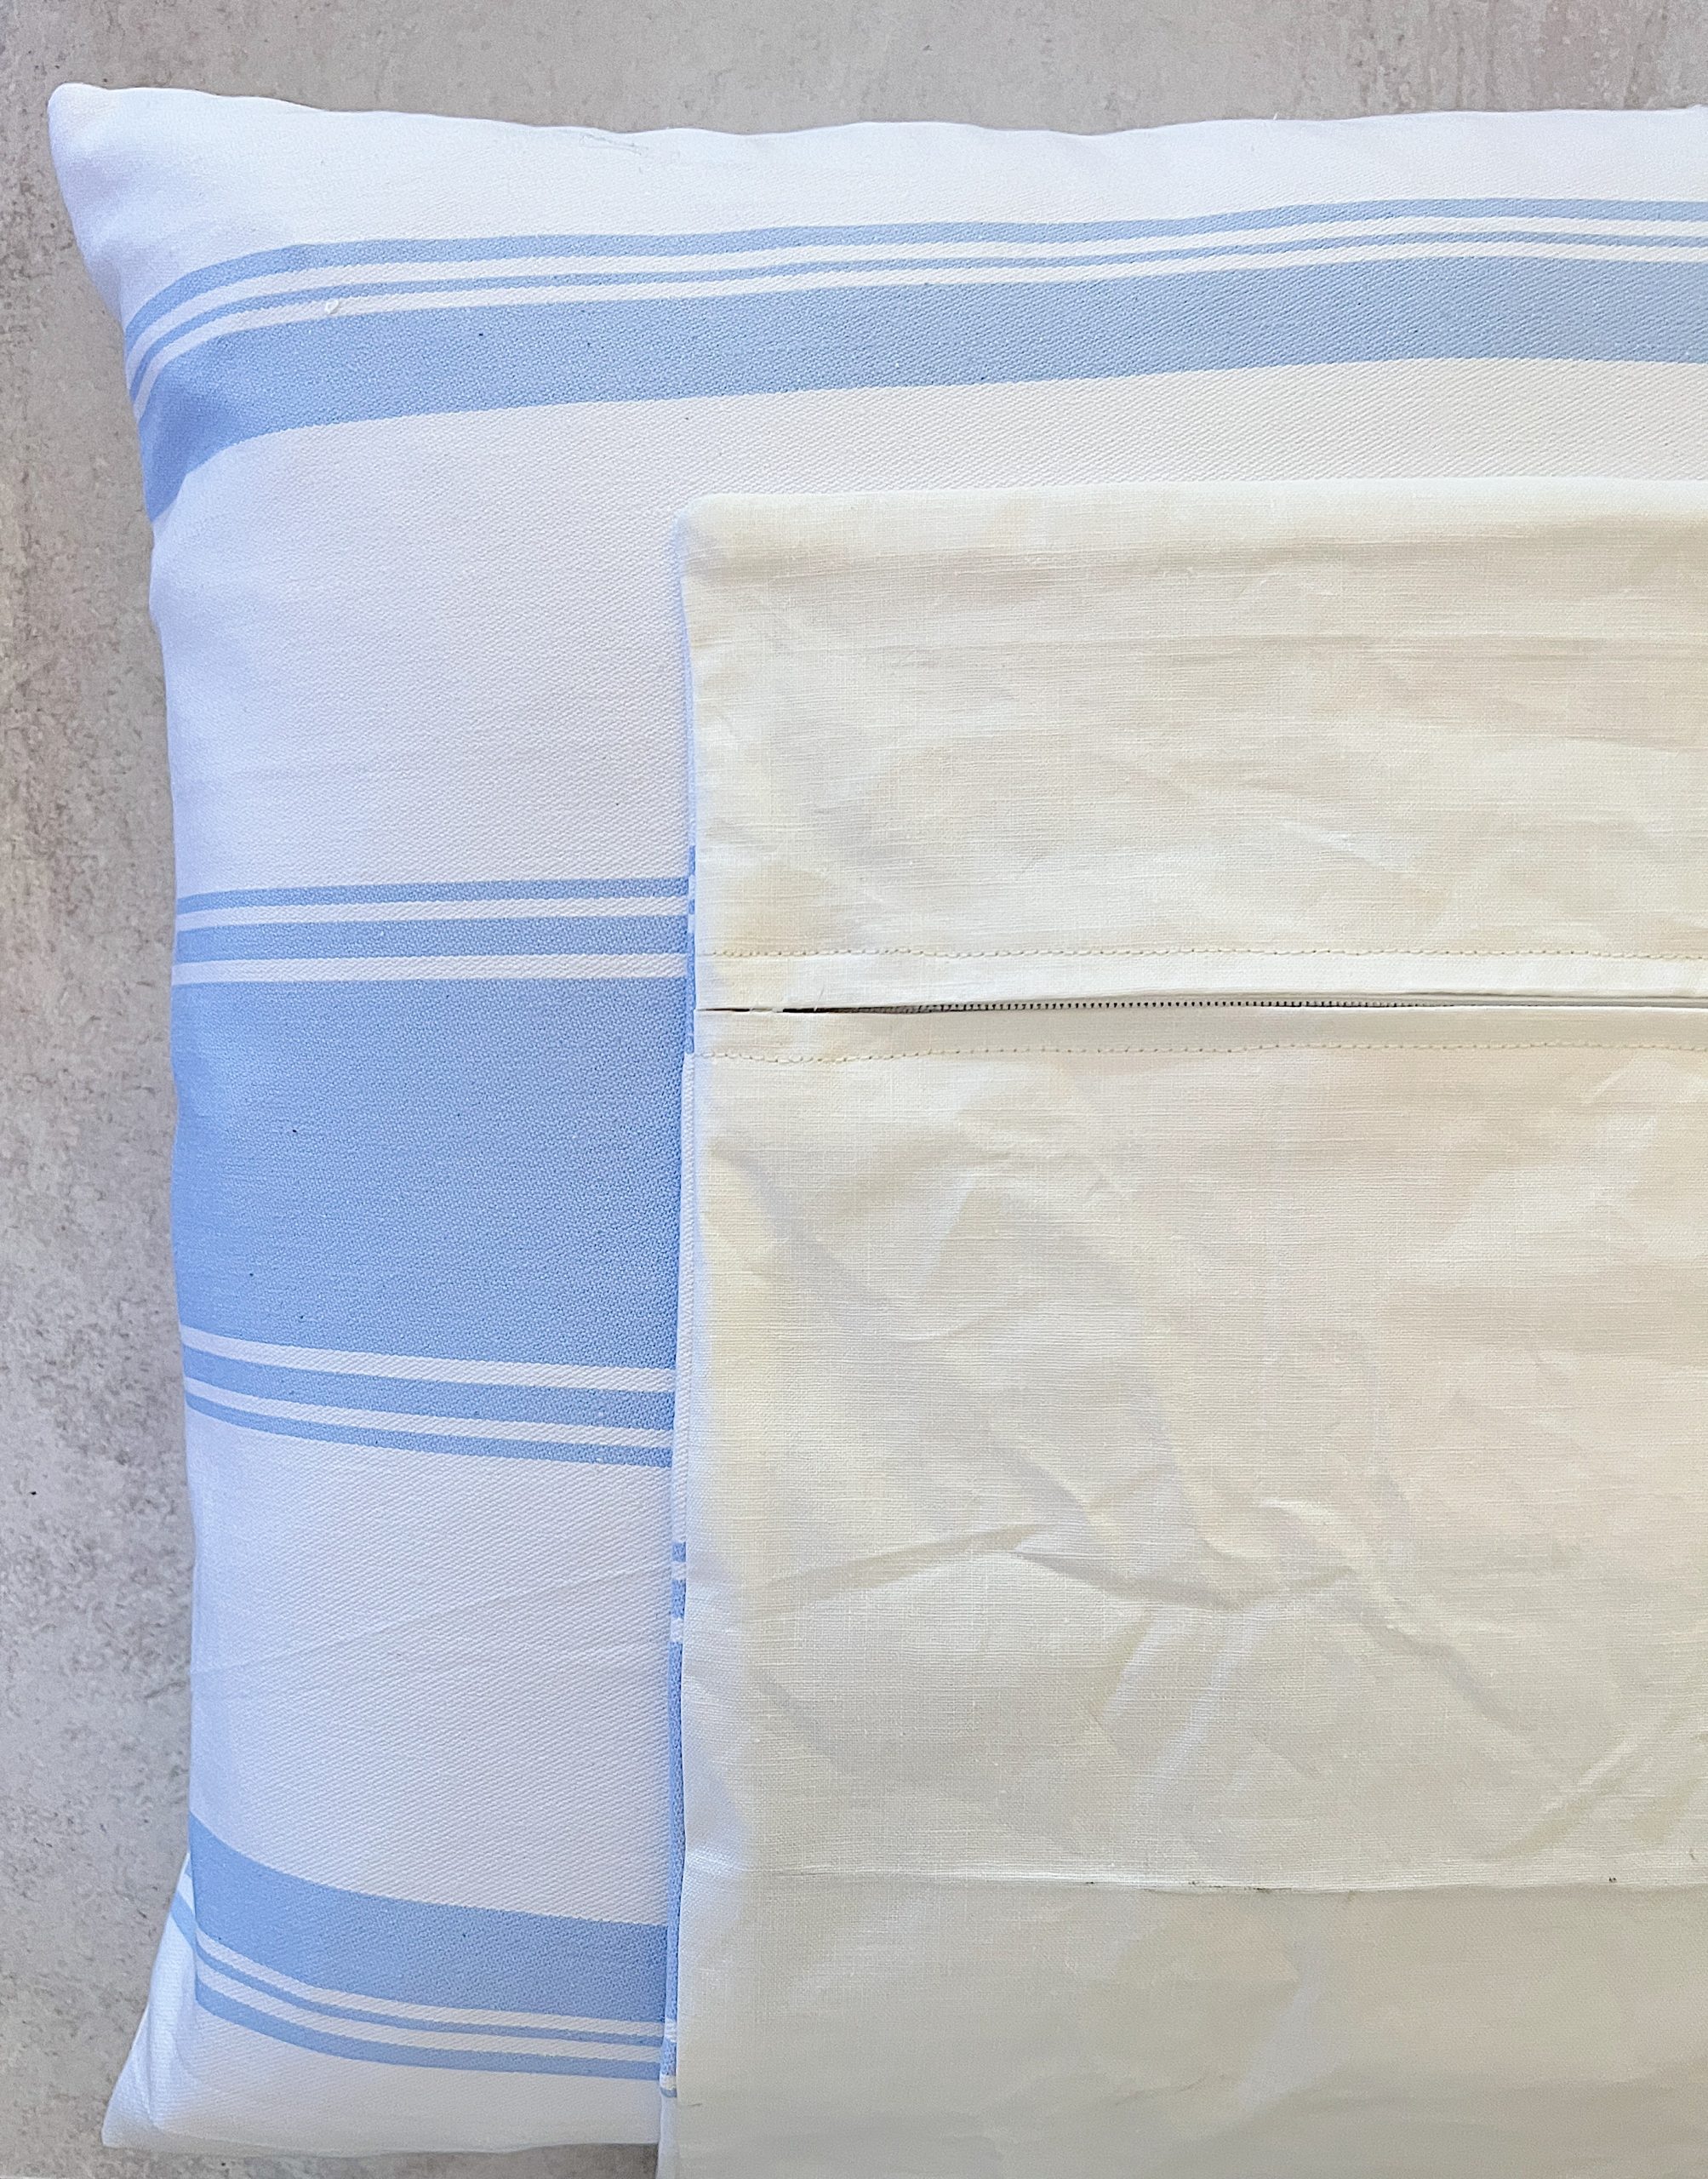 How to Make Square Pillow Covers